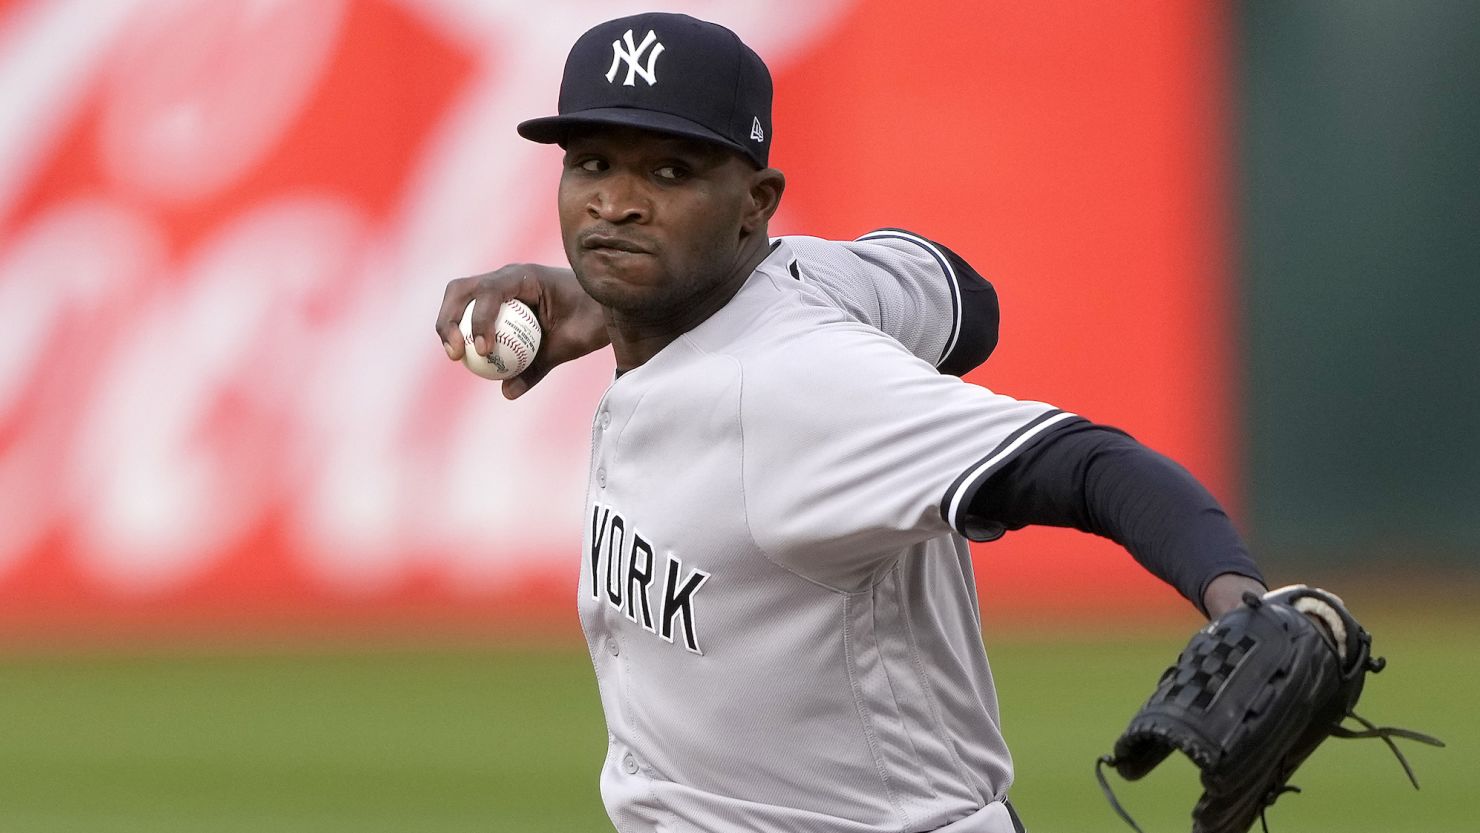 Domingo Germán accomplished the feat Wednesday in the Yankees' 11-0 win against the Oakland Athletics.